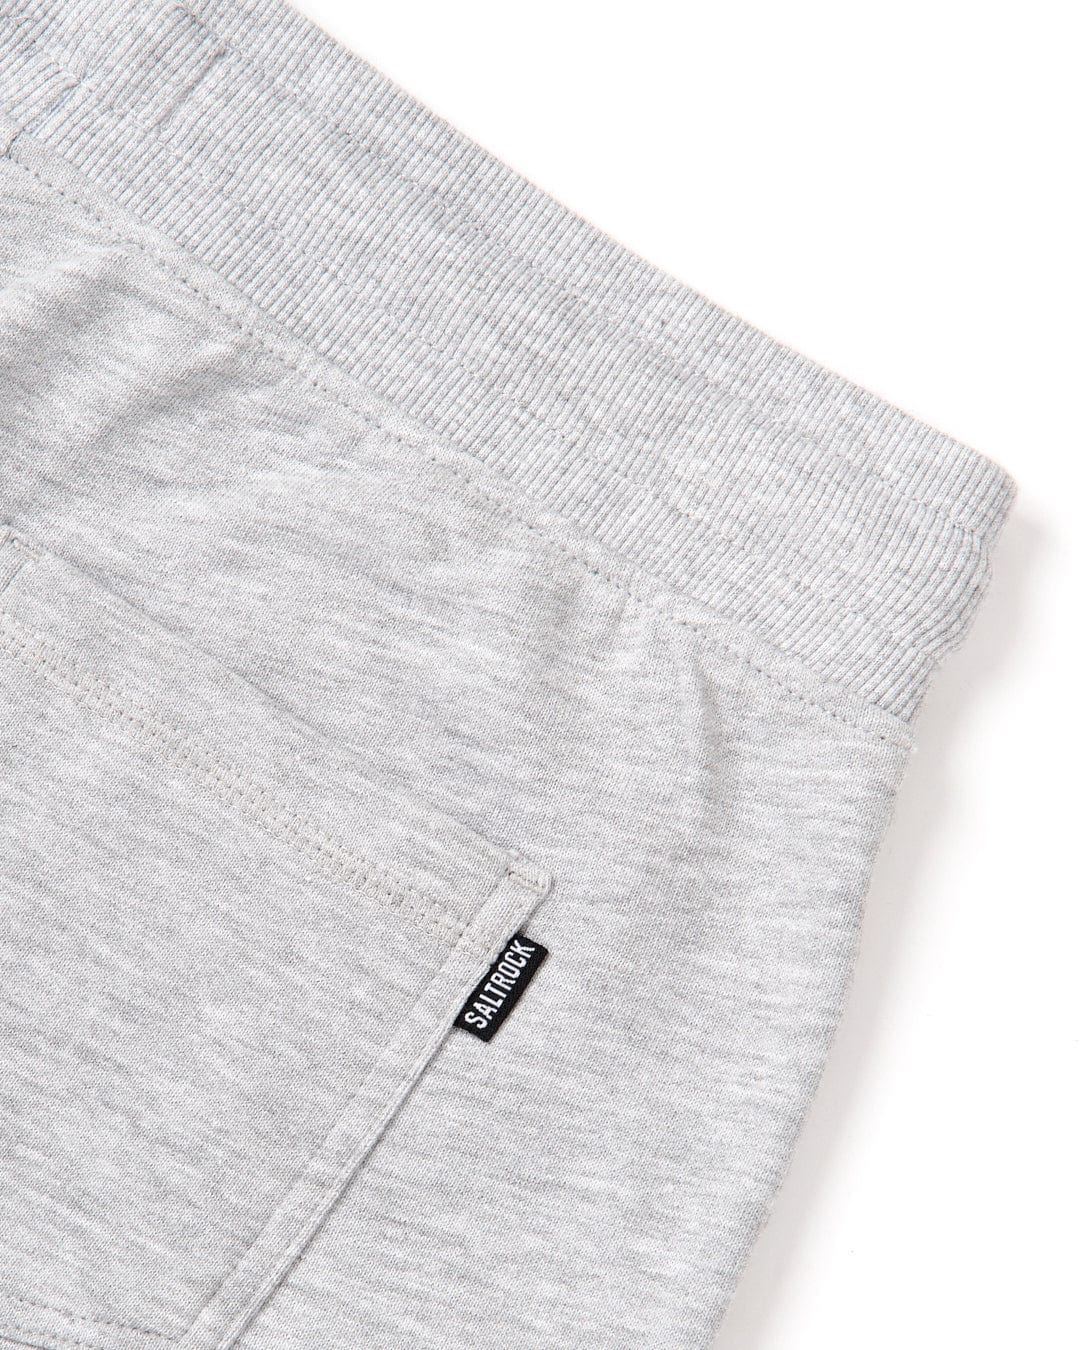 The back pocket of a Velator - Womens Sweat Short - Grey featuring a standard fit and Saltrock branding.